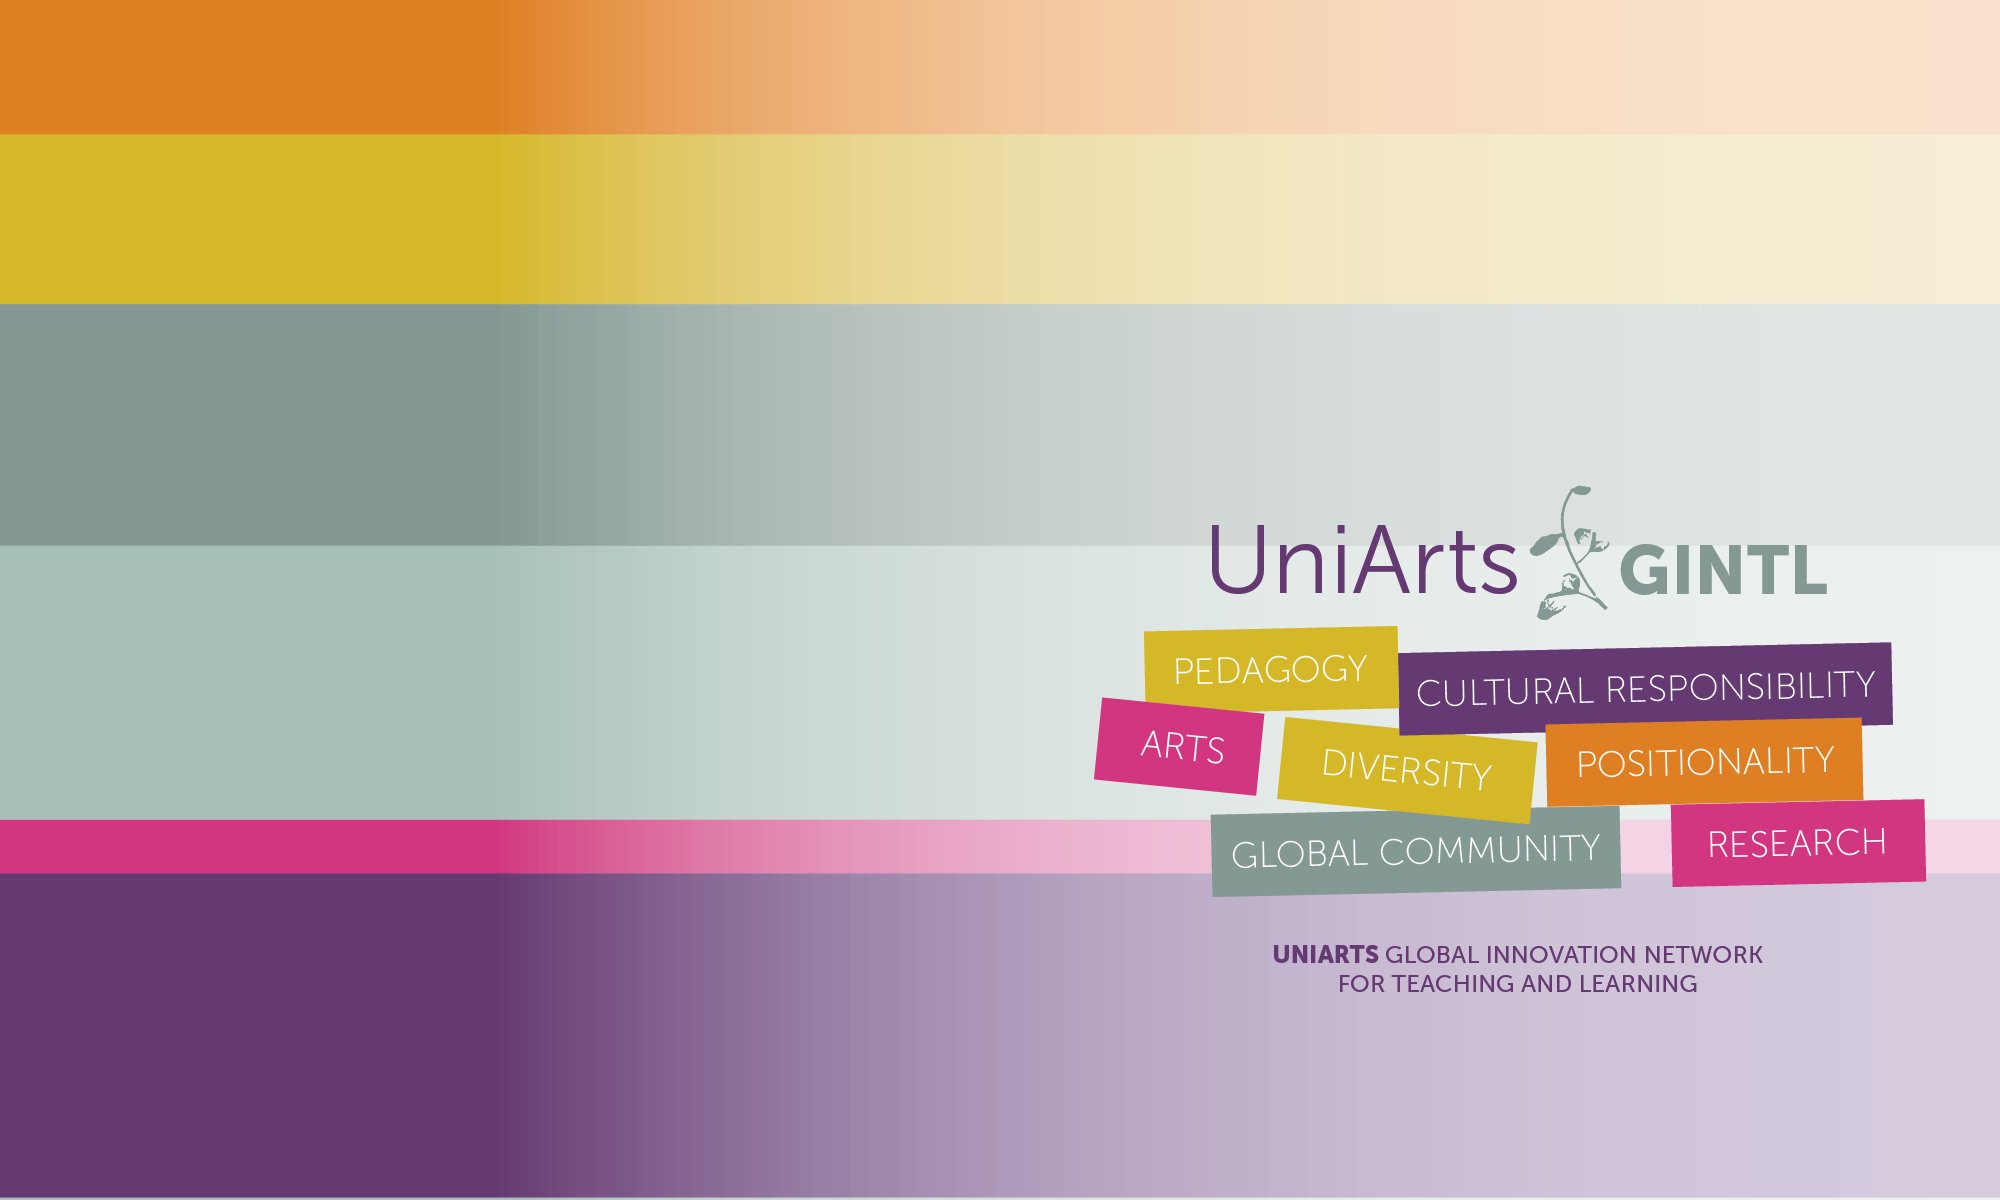 Colourful banner with the UniArts GINTL logo